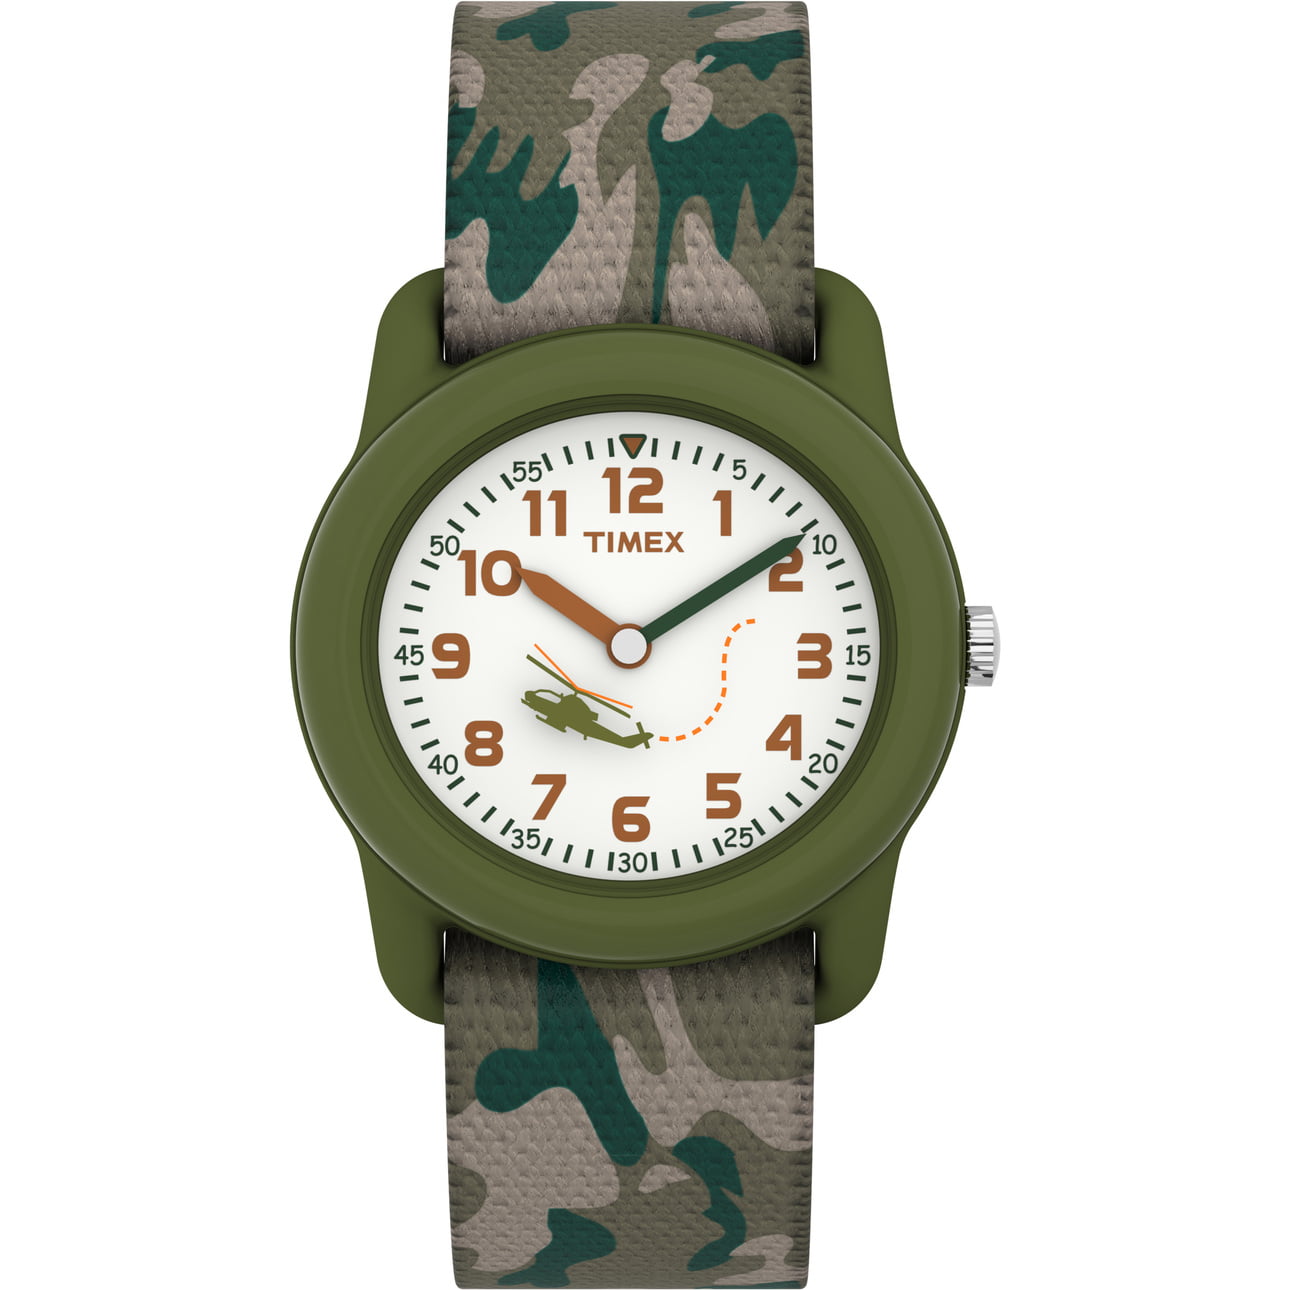 Green/Camo Kids Analog Watch with Elastic Strap